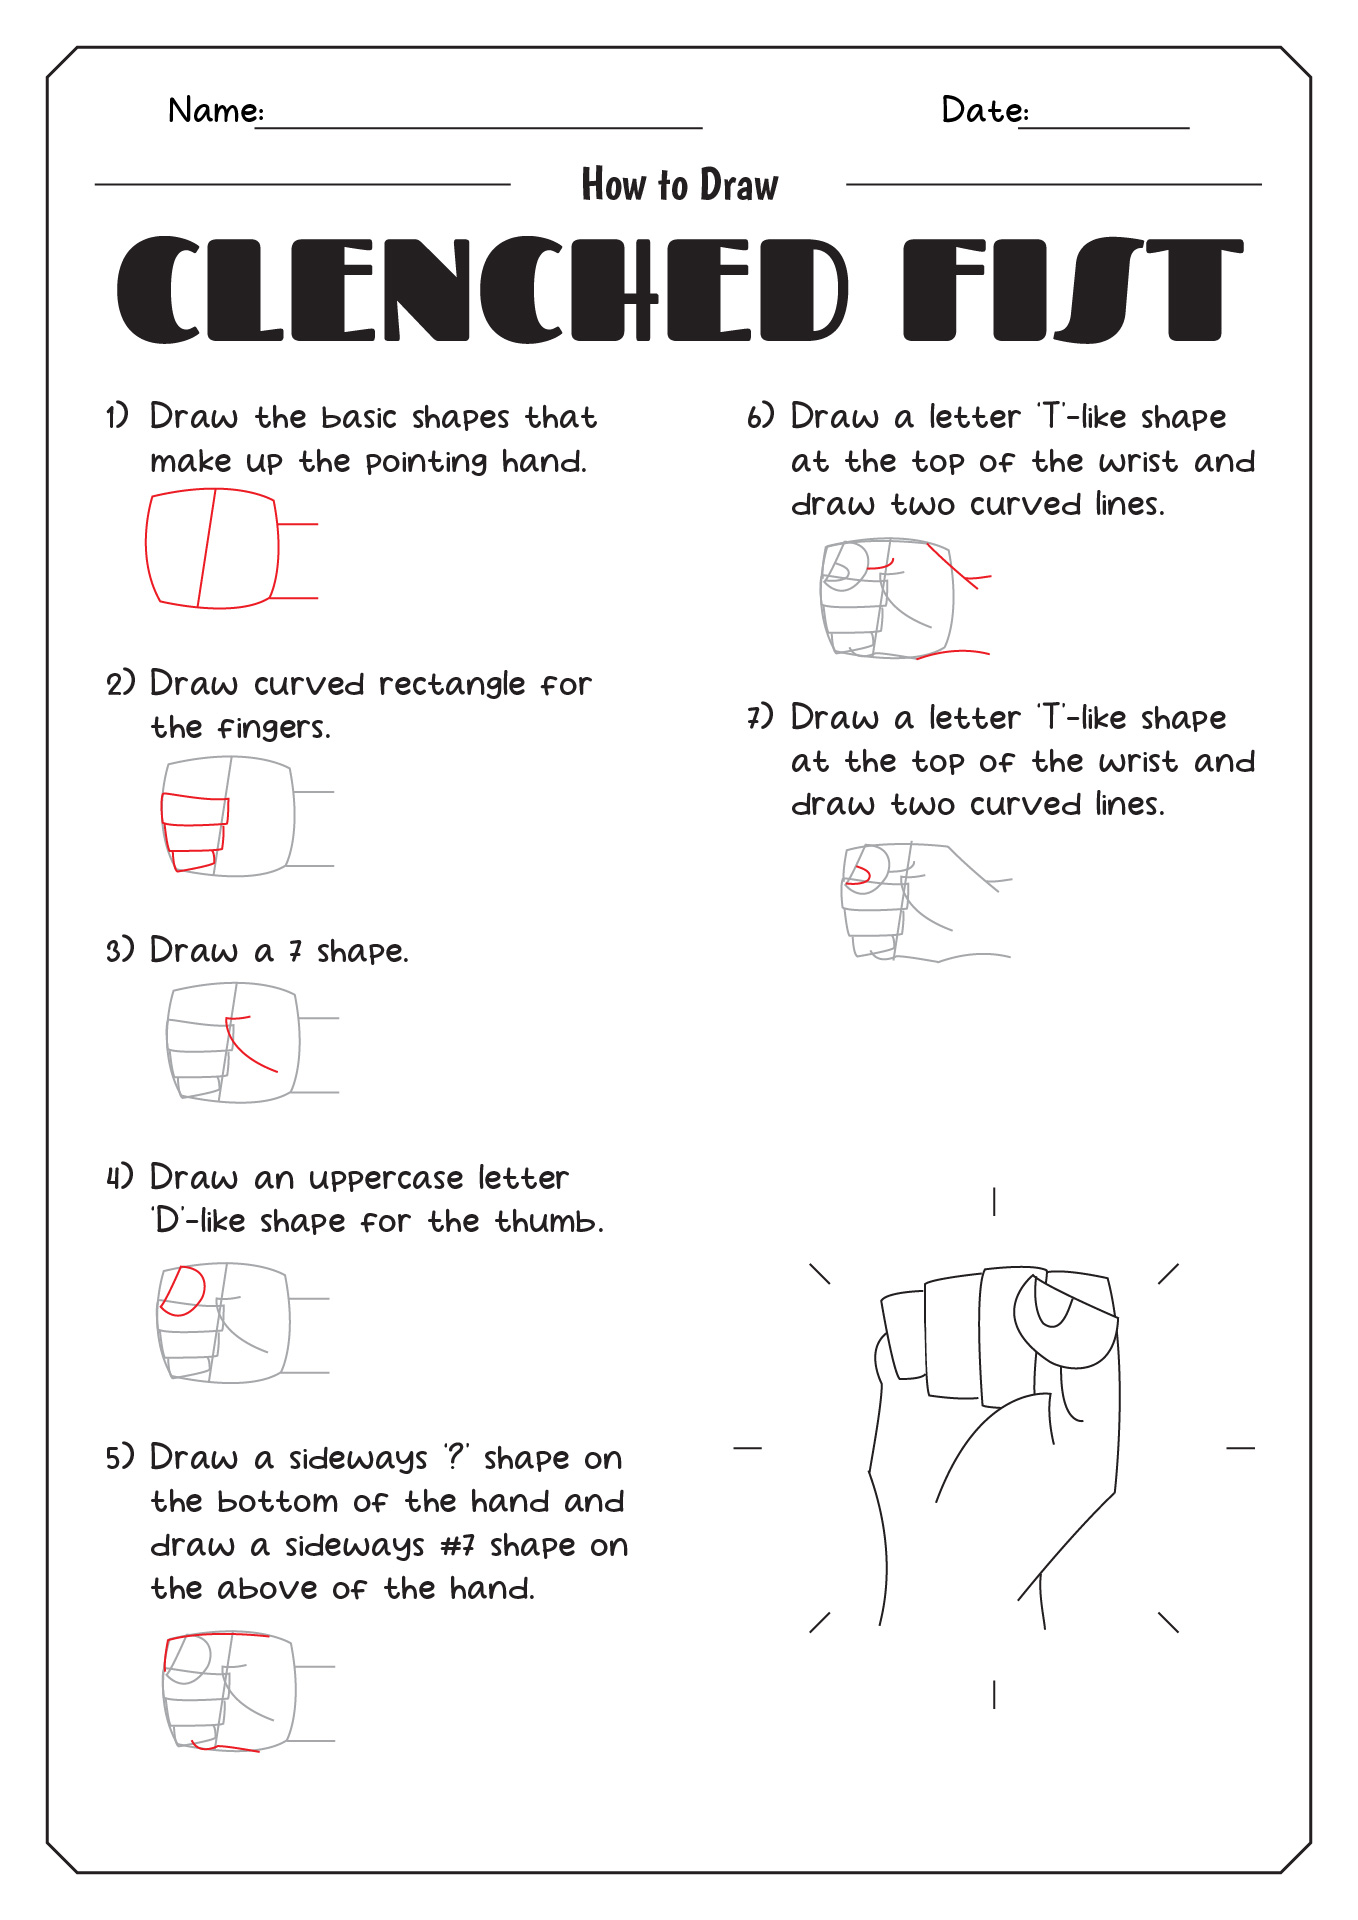 How to Draw Clenched Fist